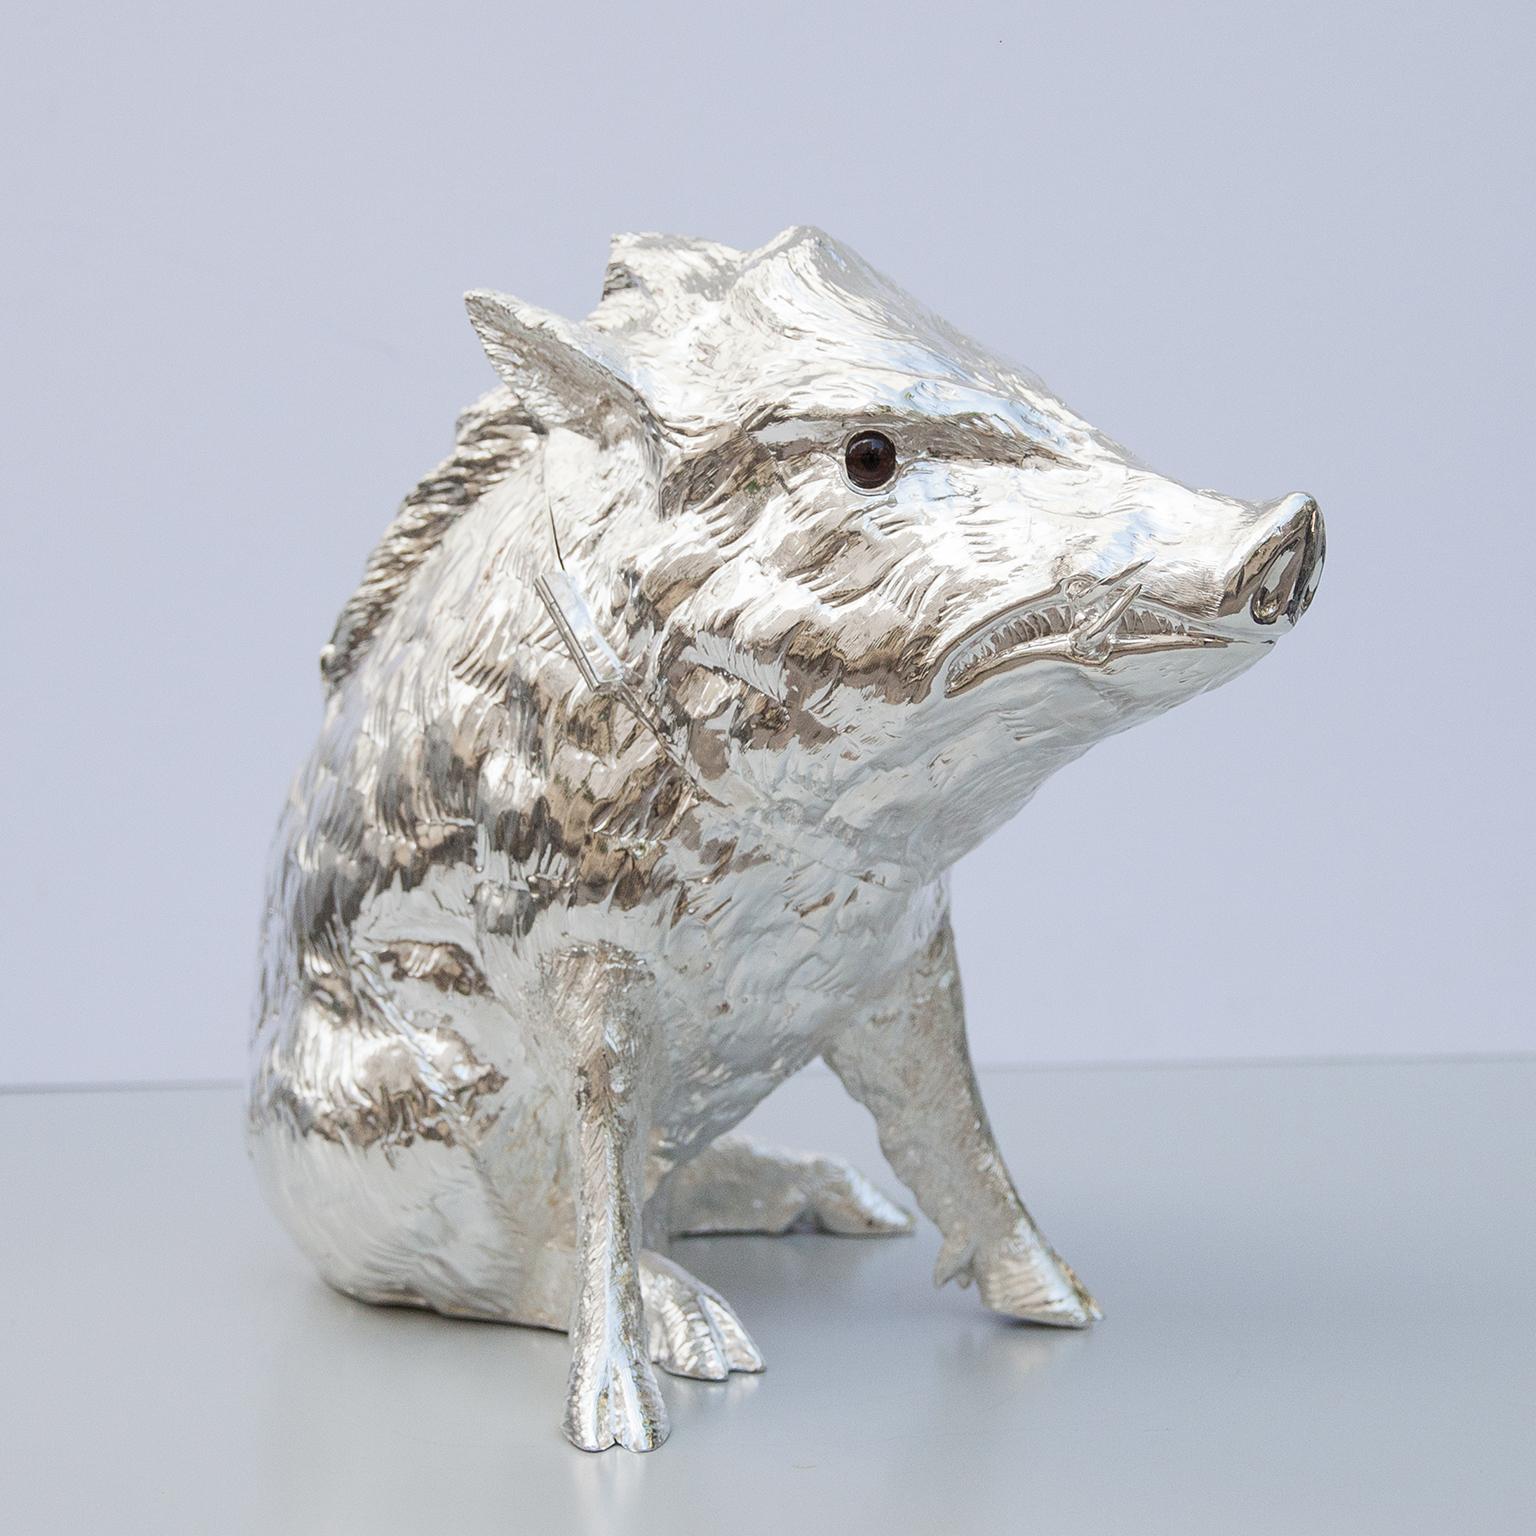 Franco Lapinis exquisite vintage wild boar sculpture wine cooler is made entirely of metal plated in silver and its surface is lightly textured to give it an organic feel, new plastic inlay inside. Either alone or combined with other pieces by the